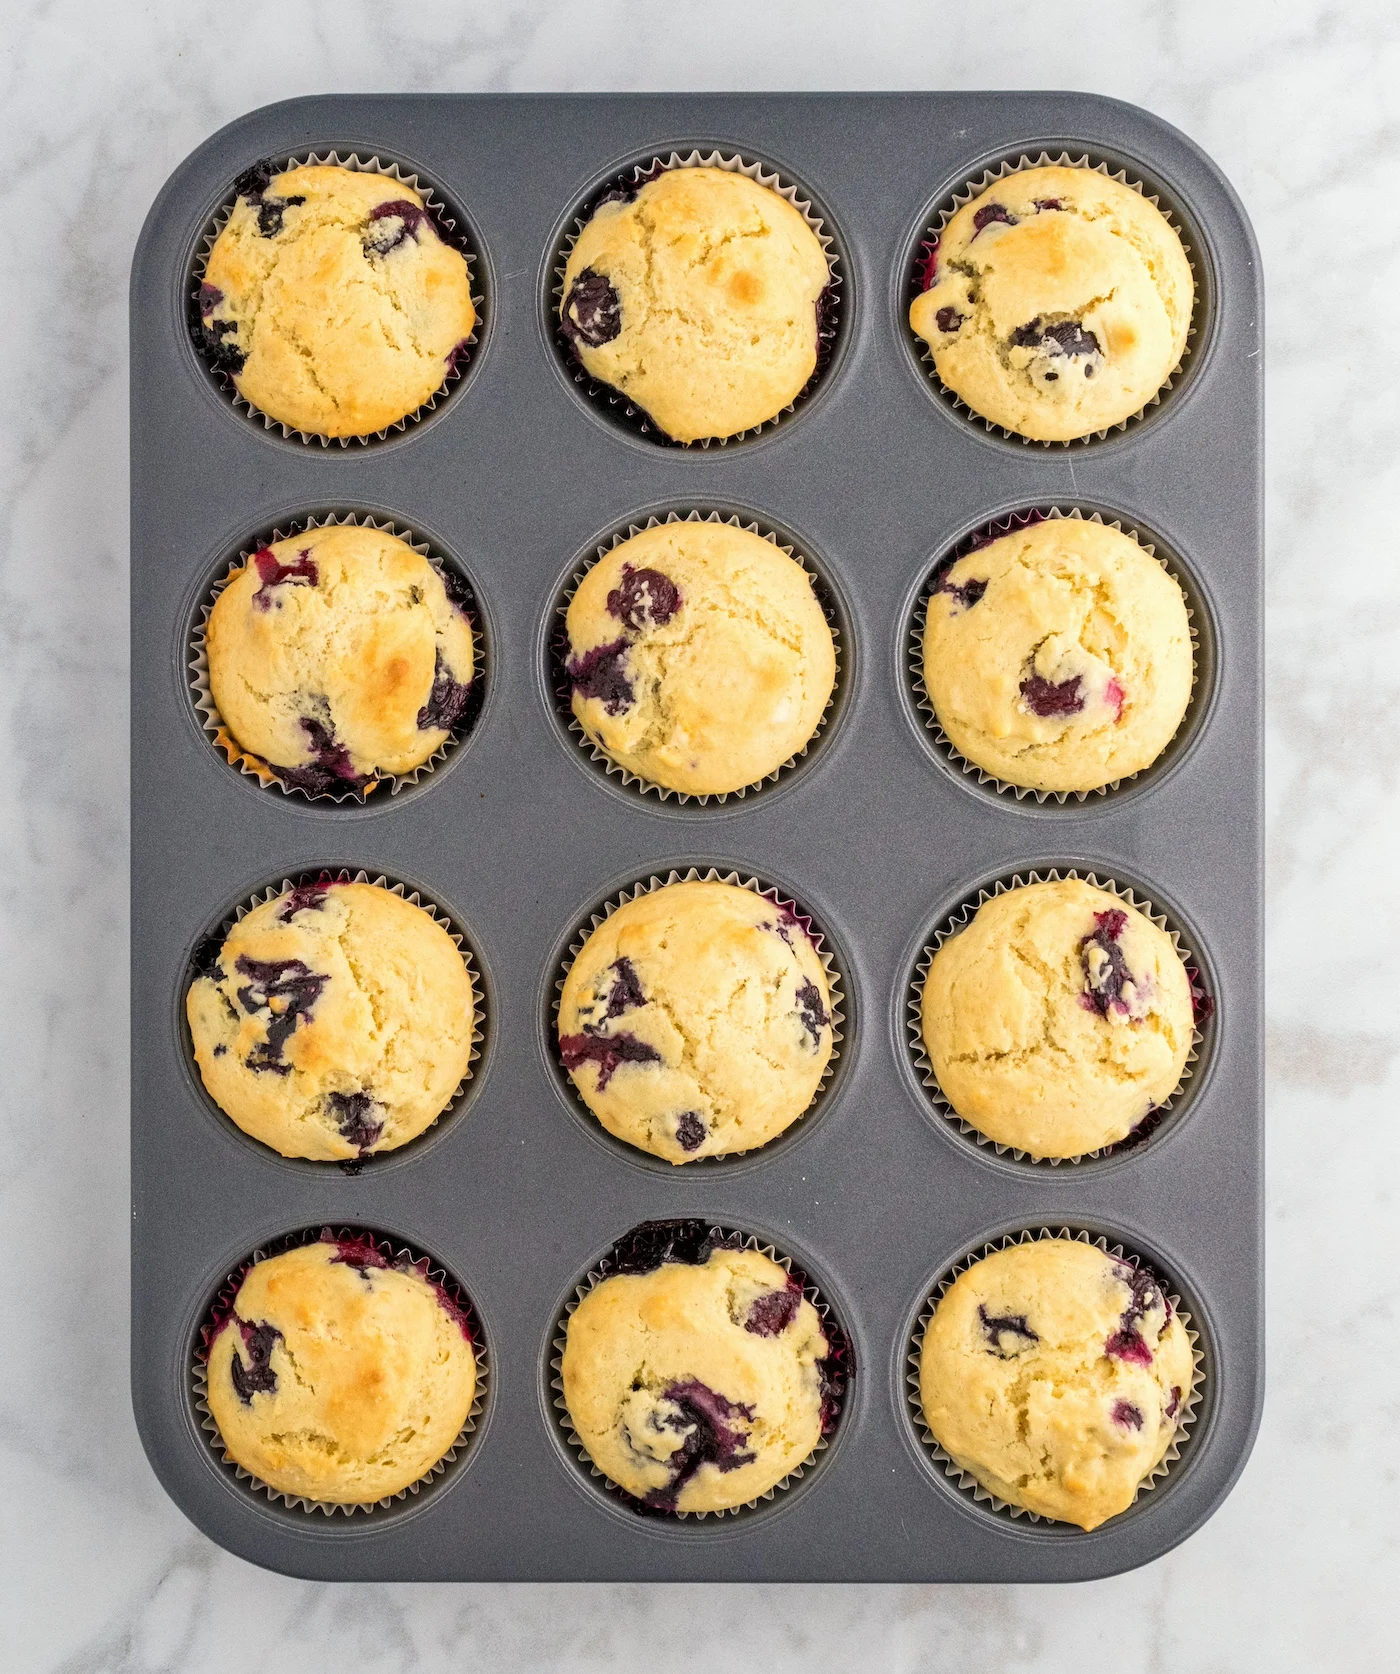 Lemon blueberry muffins baked in a pan